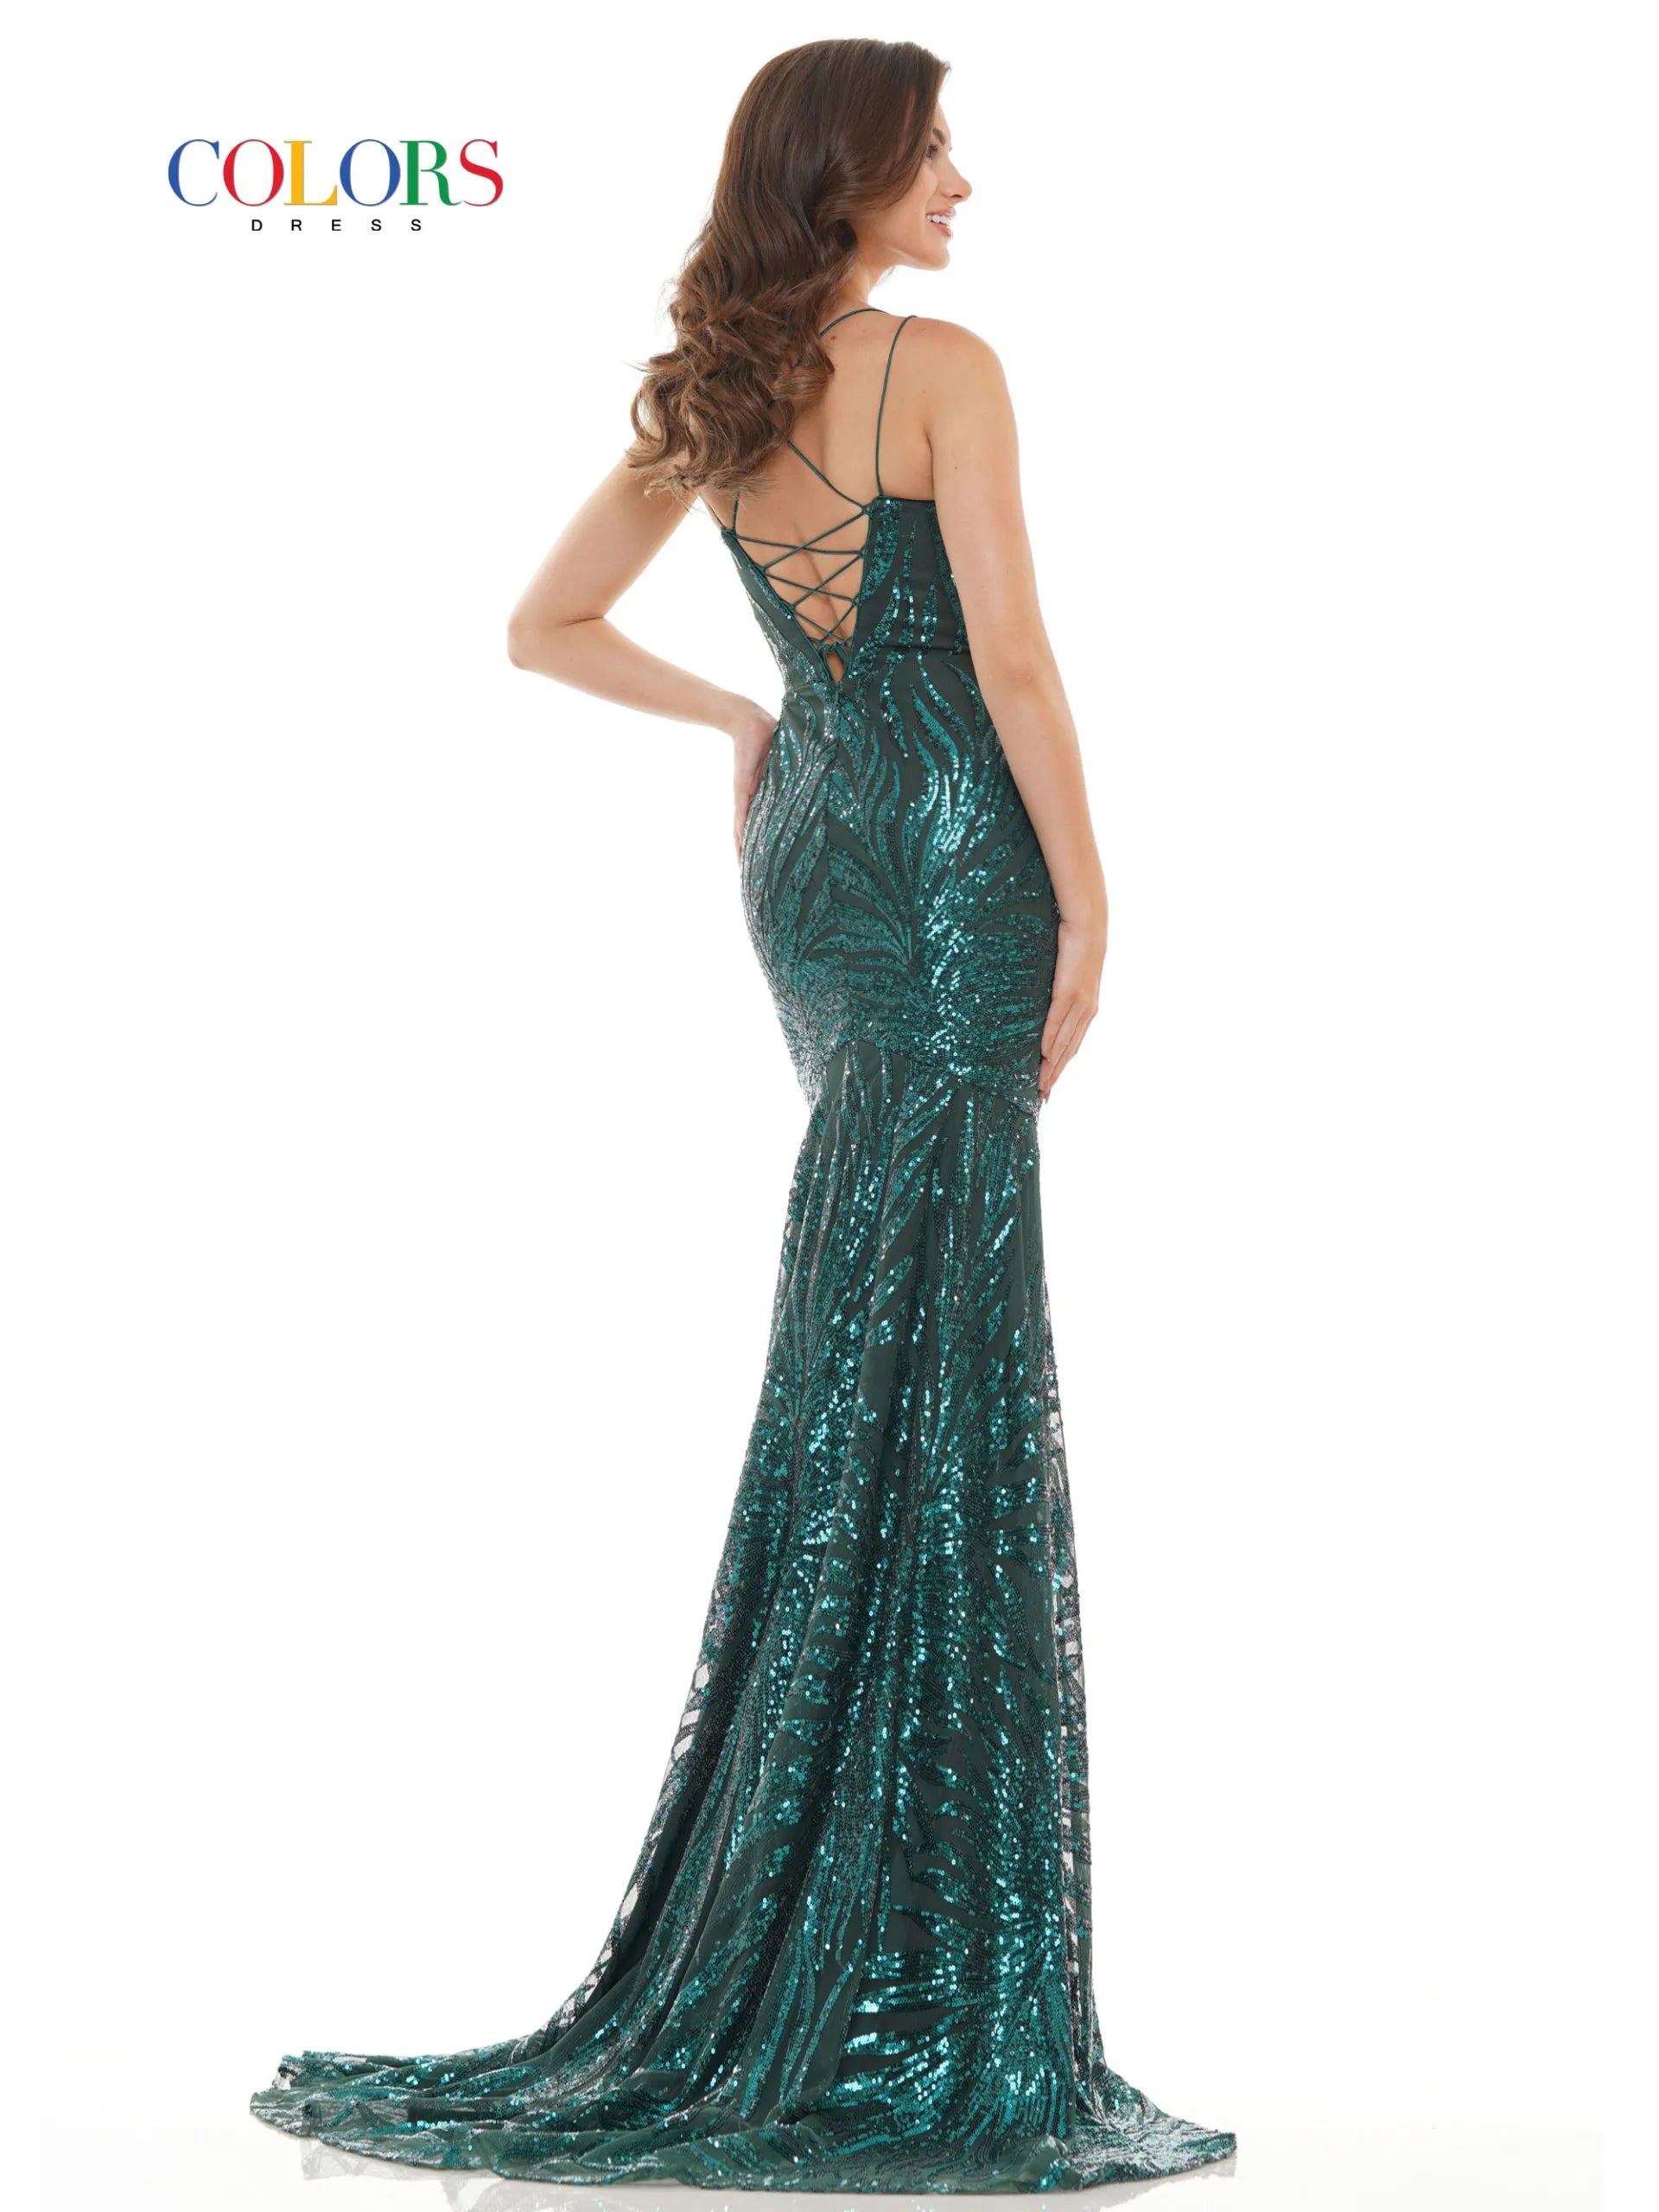 This stunning Colors Dress 2743 showcases a fitted mermaid silhouette with a flattering scoop neck and intricate sequin detailing. The long prom dress is perfect for formal events and pageants, offering a glamorous look that will make you stand out. Made with high-quality fabric, it guarantees both style and comfort for any occasion.